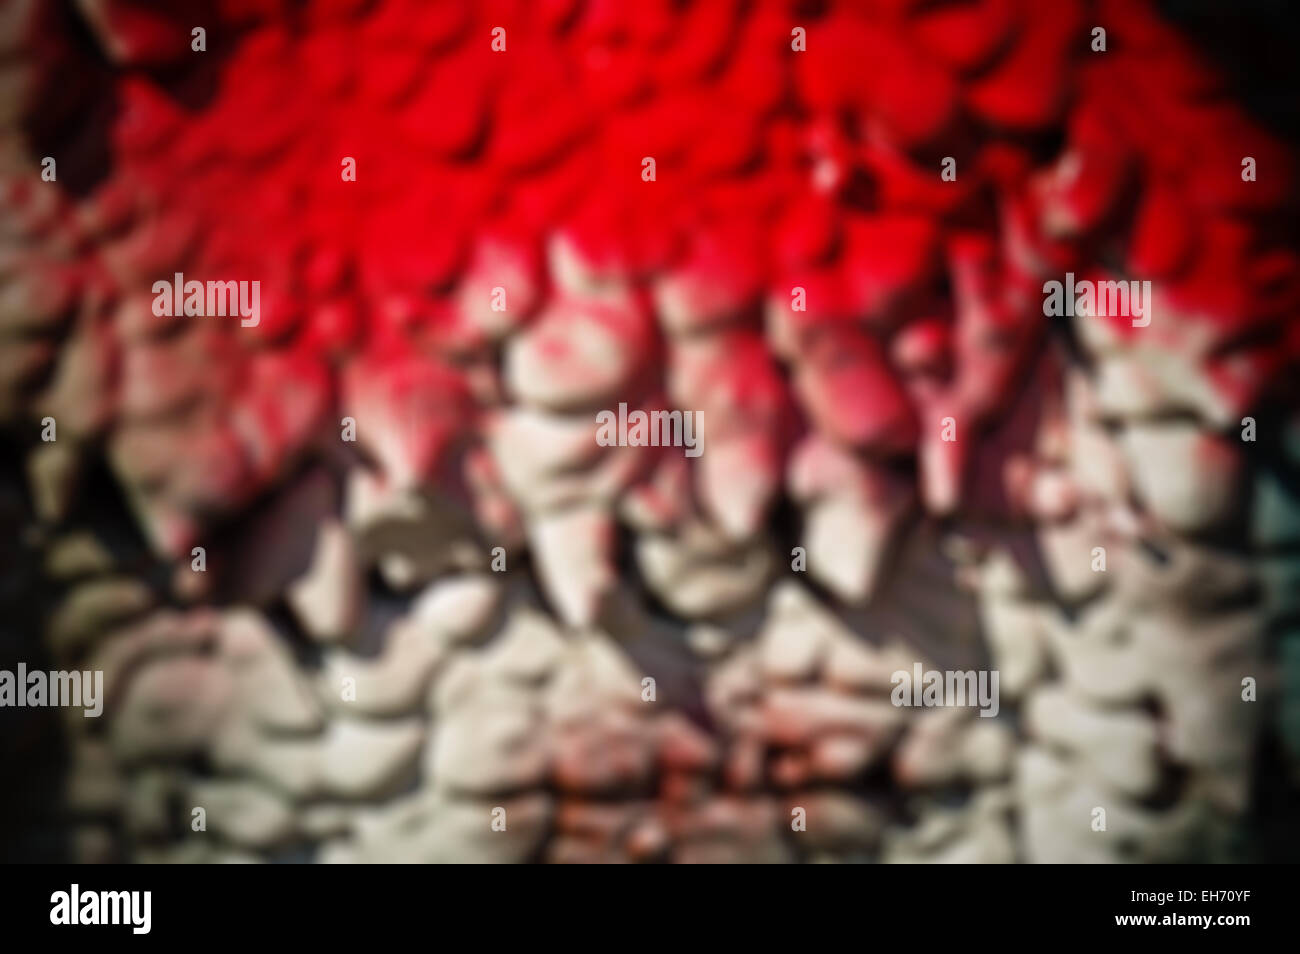 red and white spraypaint blur background with vignette Stock Photo